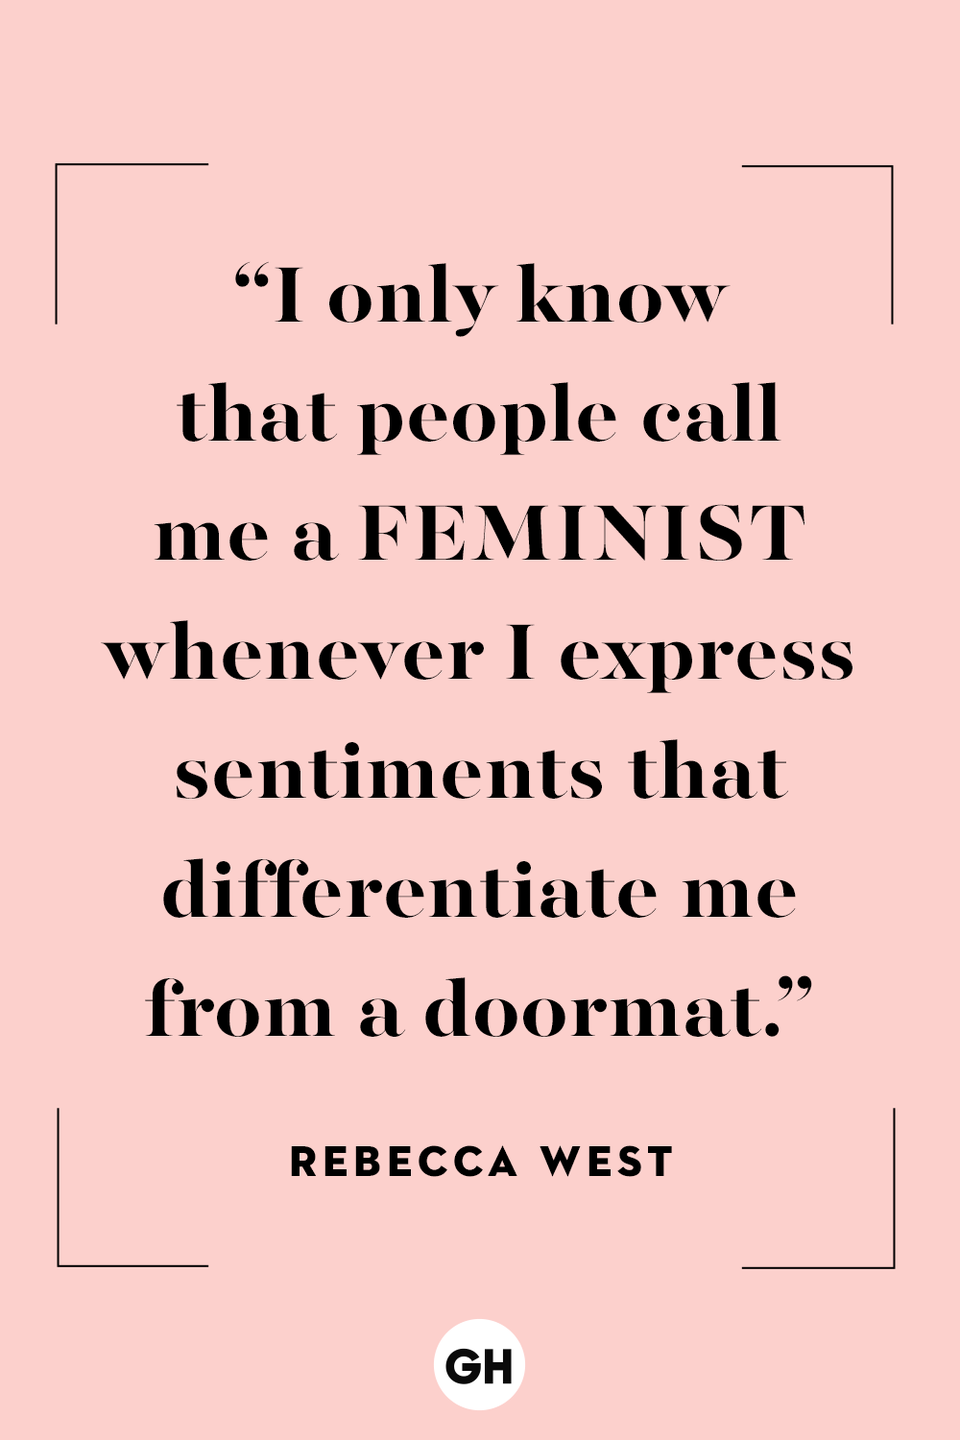 21 Most Empowering Feminist Quotes Of All Time 